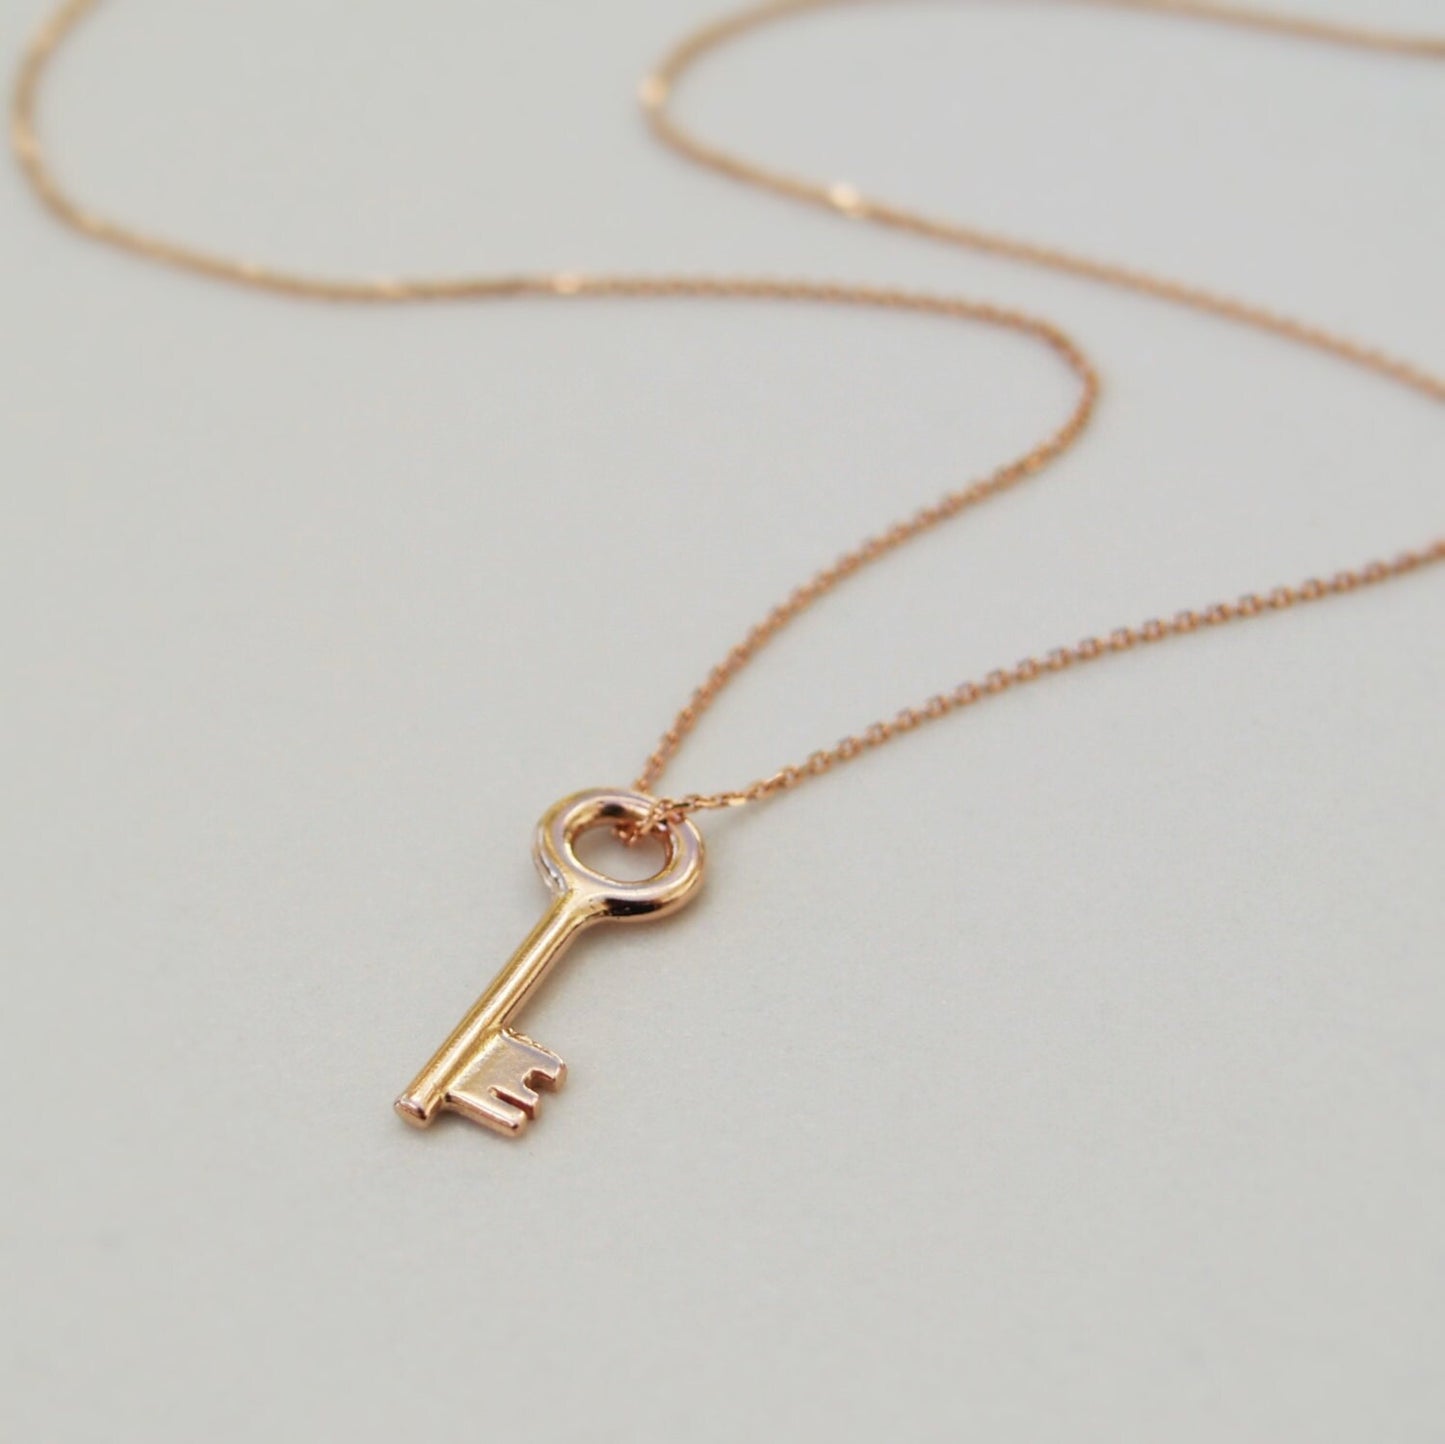 9ct solid rose gold small and dainty key charm pendant and chain